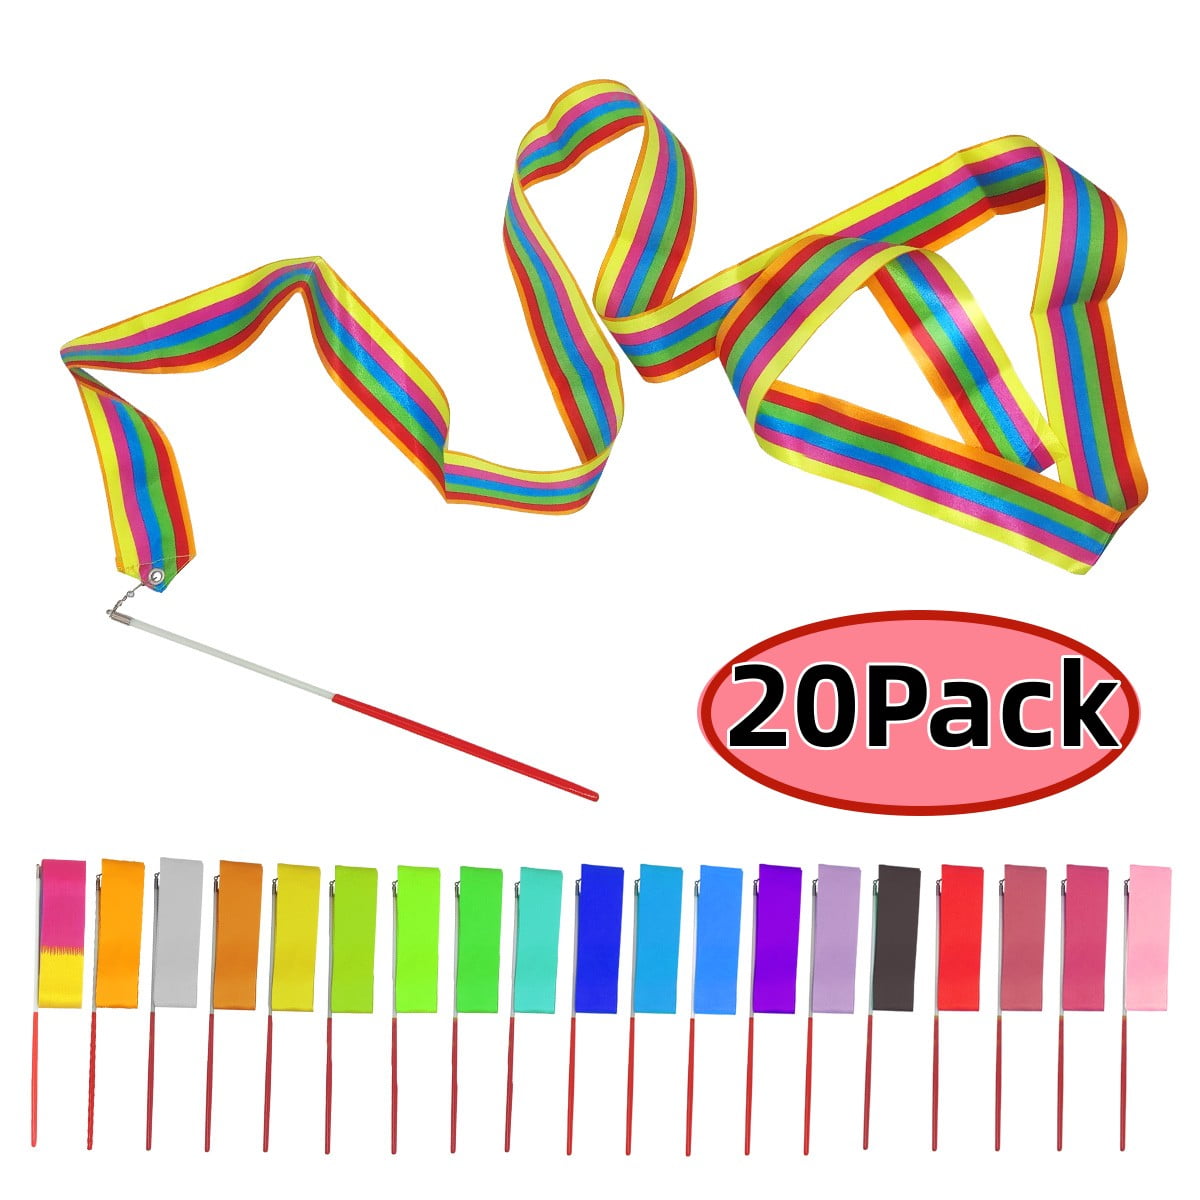 Rainbow Kids Party Favors - 1 Pack Dance Ribbon Streamers Gymnastics Baton  Spinning Work Flags, Girls Birthday Ball Party Decorations Gift Bags  Stuffed Toys 